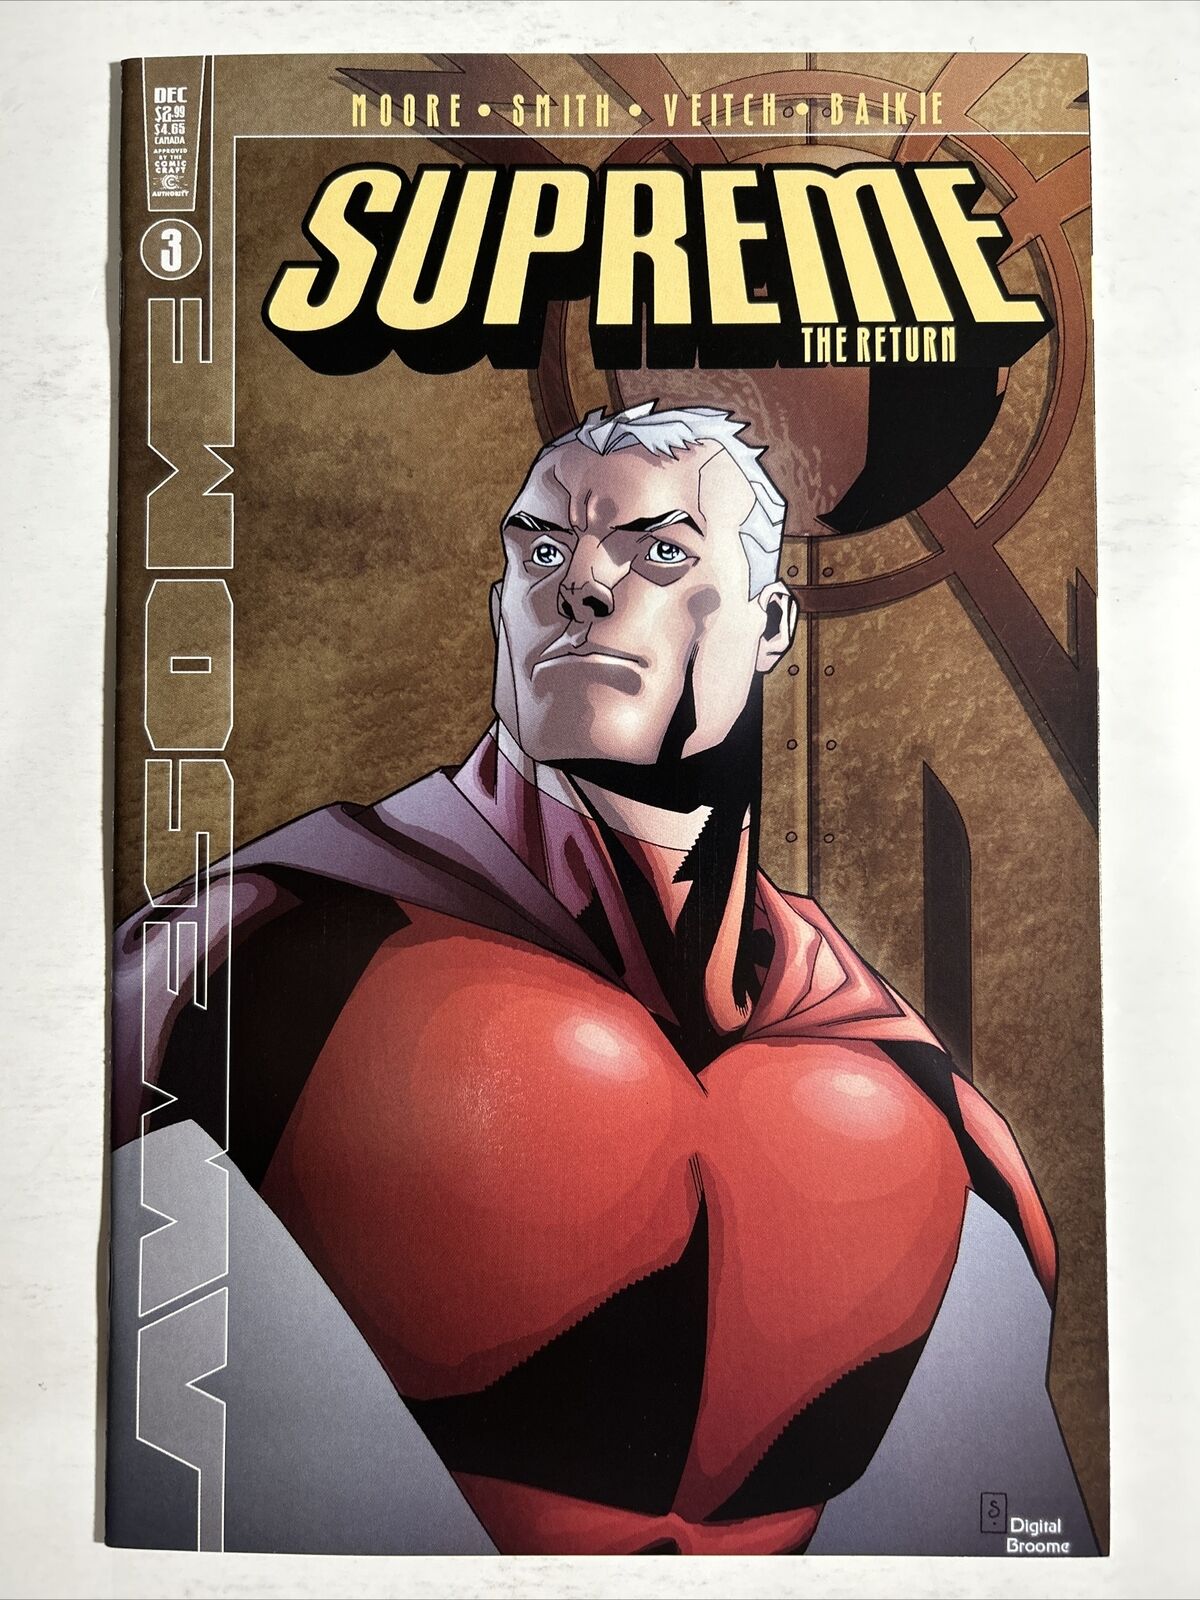 Supreme The Return 3 (59) Awesome Entertainment Alan Moore combine ship Copy B